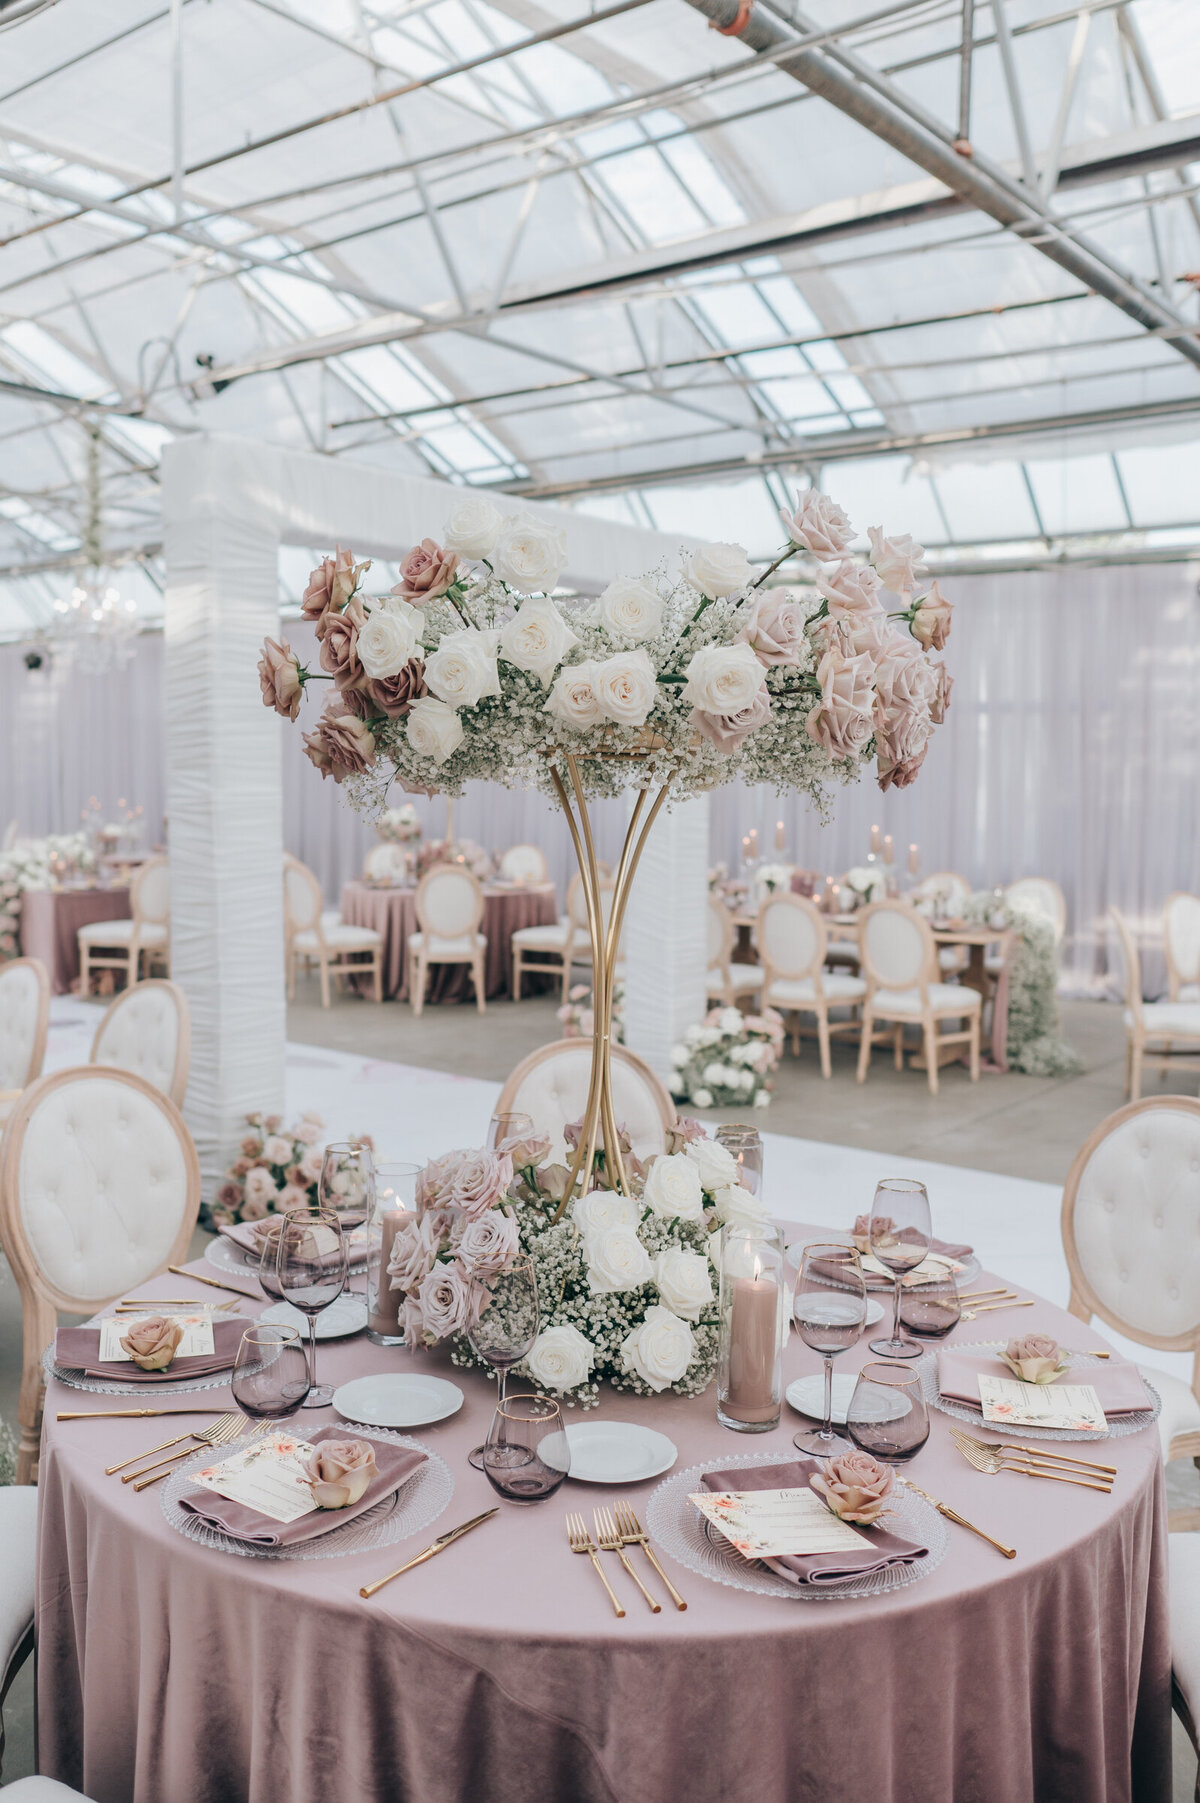 Glamorous rose centre pieces with gold accents and baby's breath